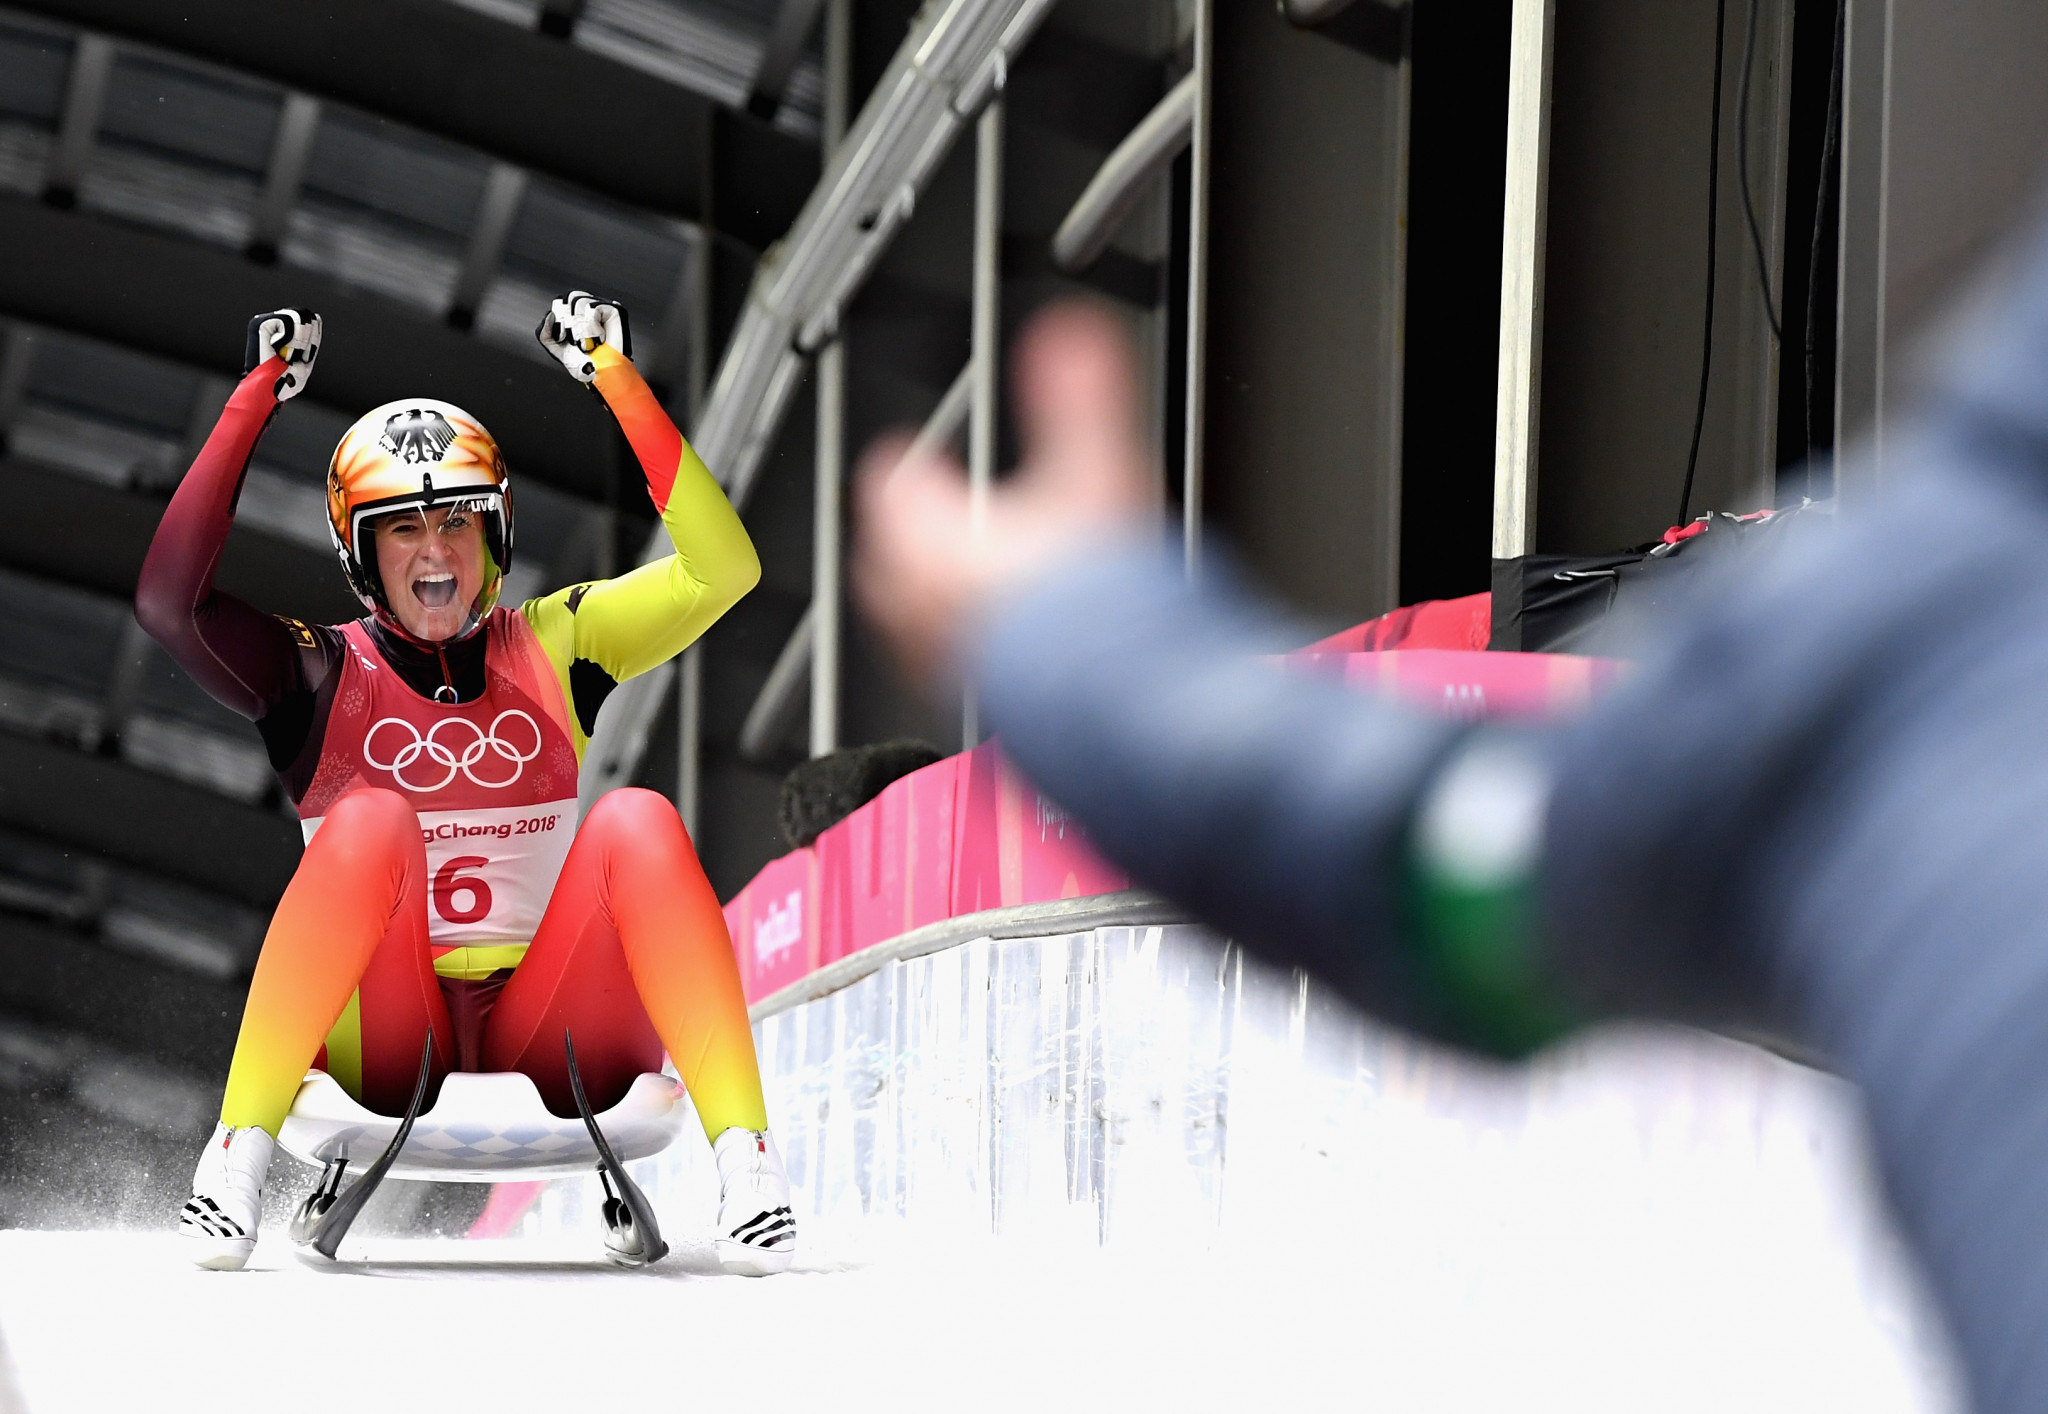 Geisenberger holds nerve to successfully defend Olympic luge crown